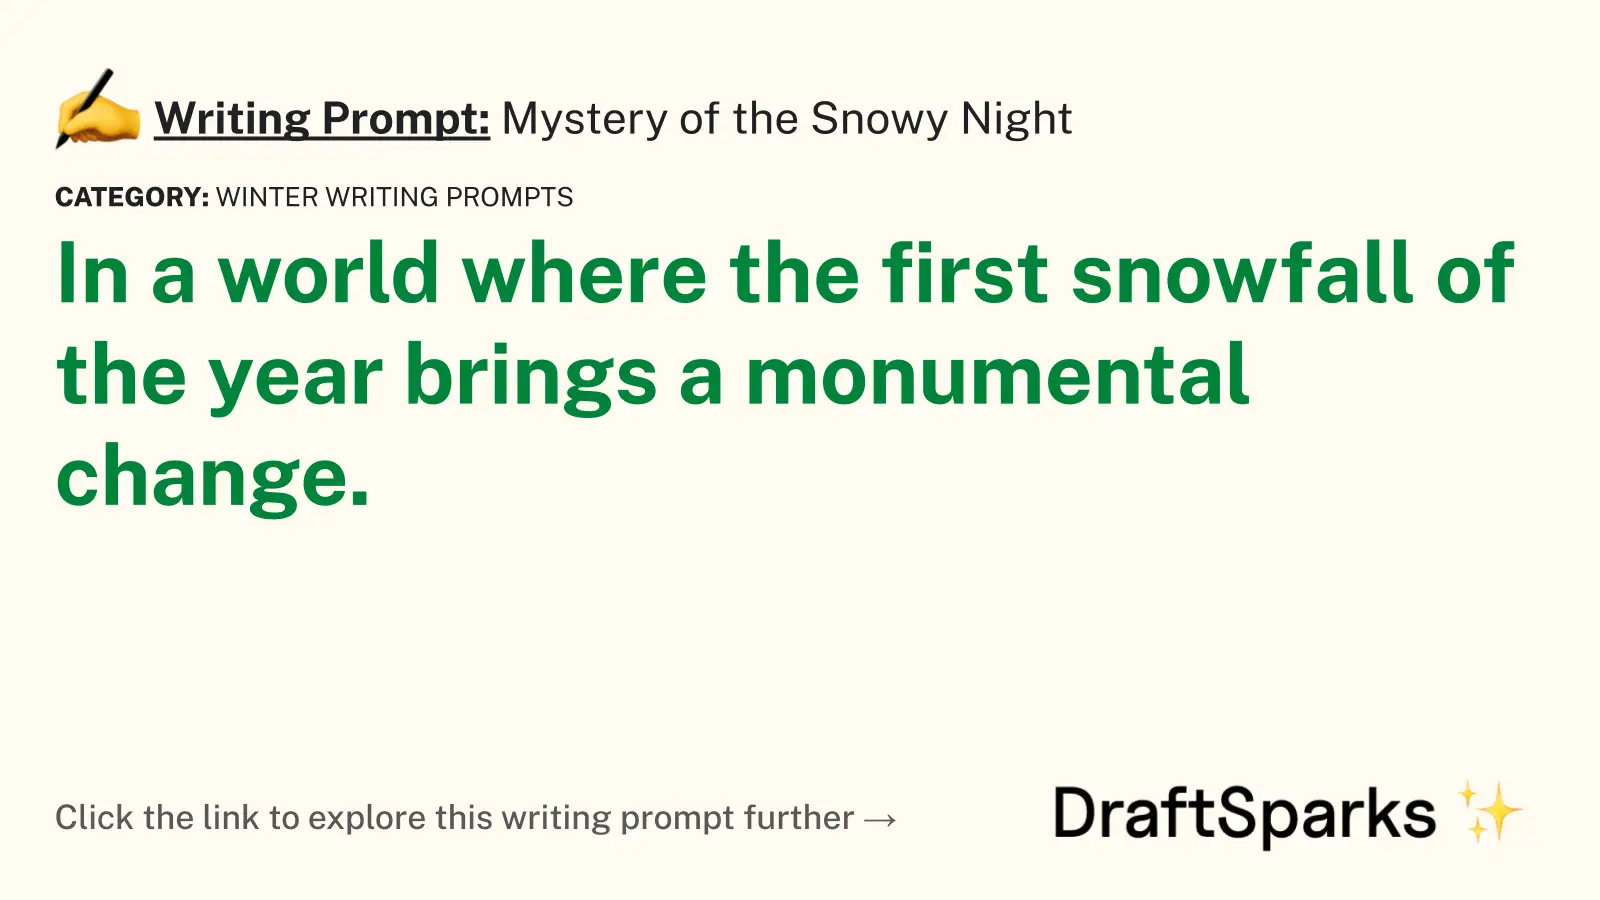 Mystery of the Snowy Night